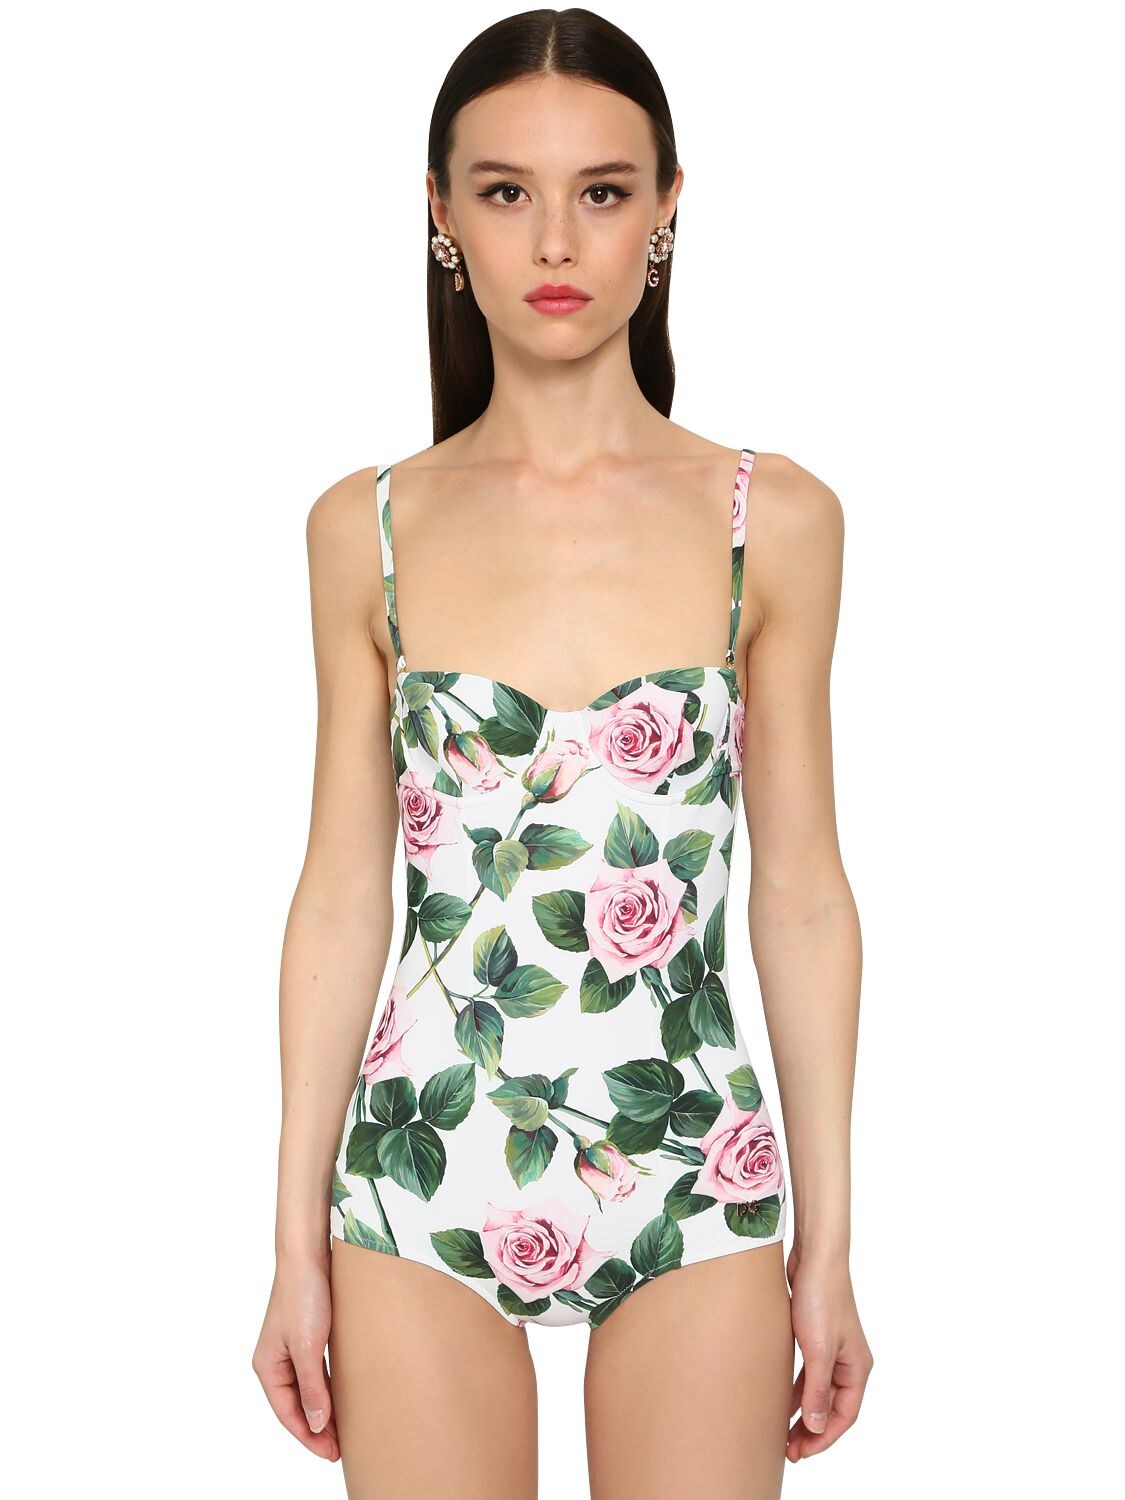 DOLCE & GABBANA JERSEY PRINTED ONE PIECE SWIMSUIT,71IB41075-SEE5NKM1